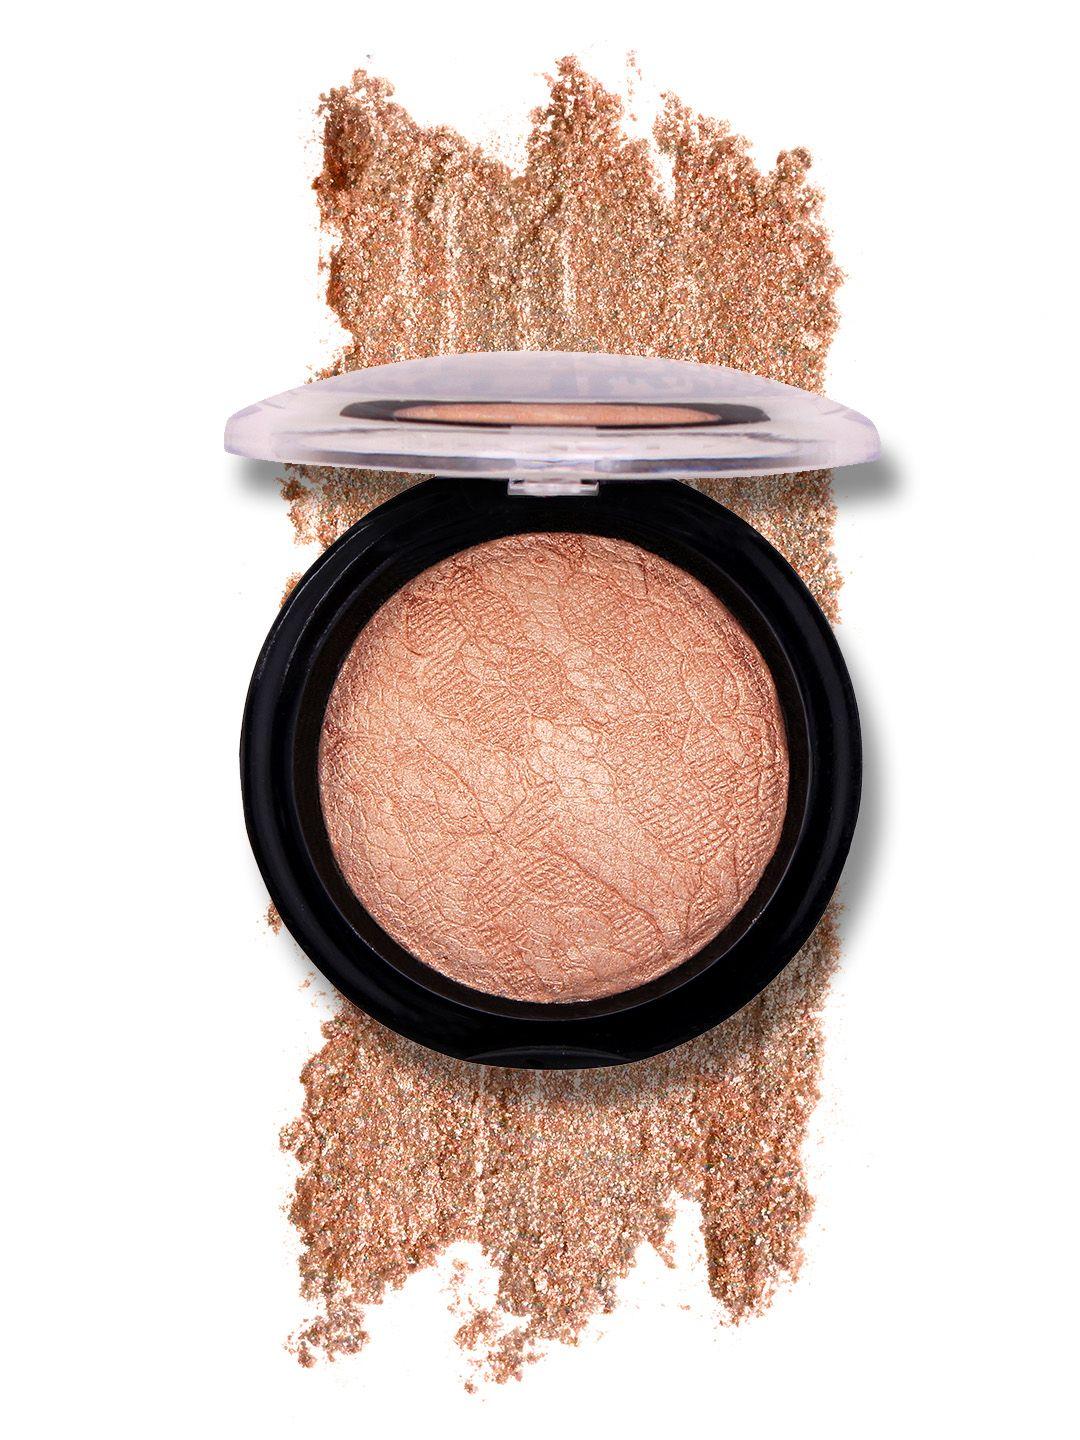 incolor-miracle-touch-05-shine-bronze-highlighter-9g